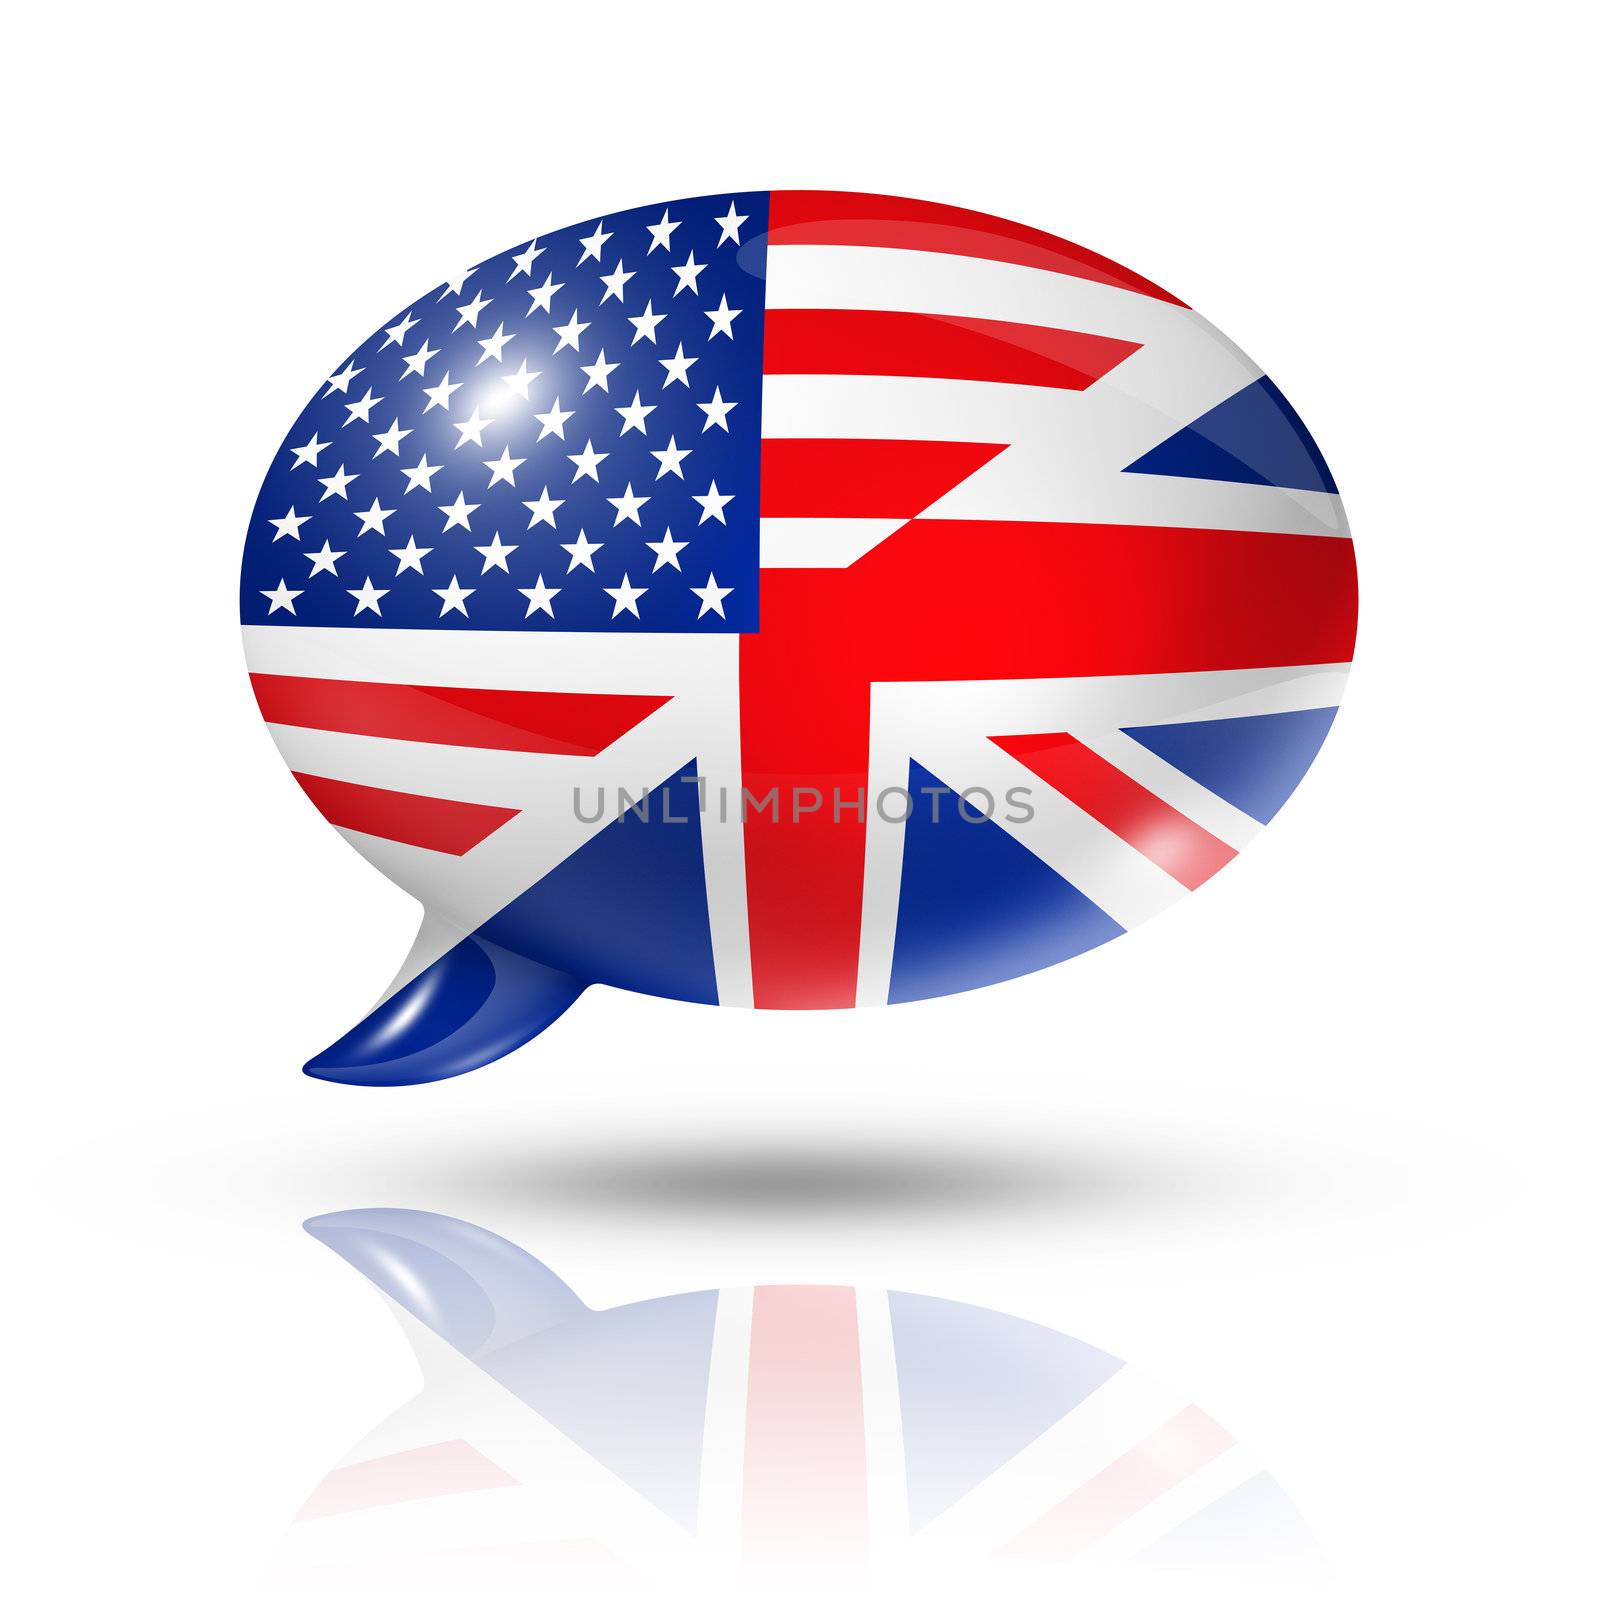 three dimensional UK and USA flags in a speech bubble isolated on white with clipping path